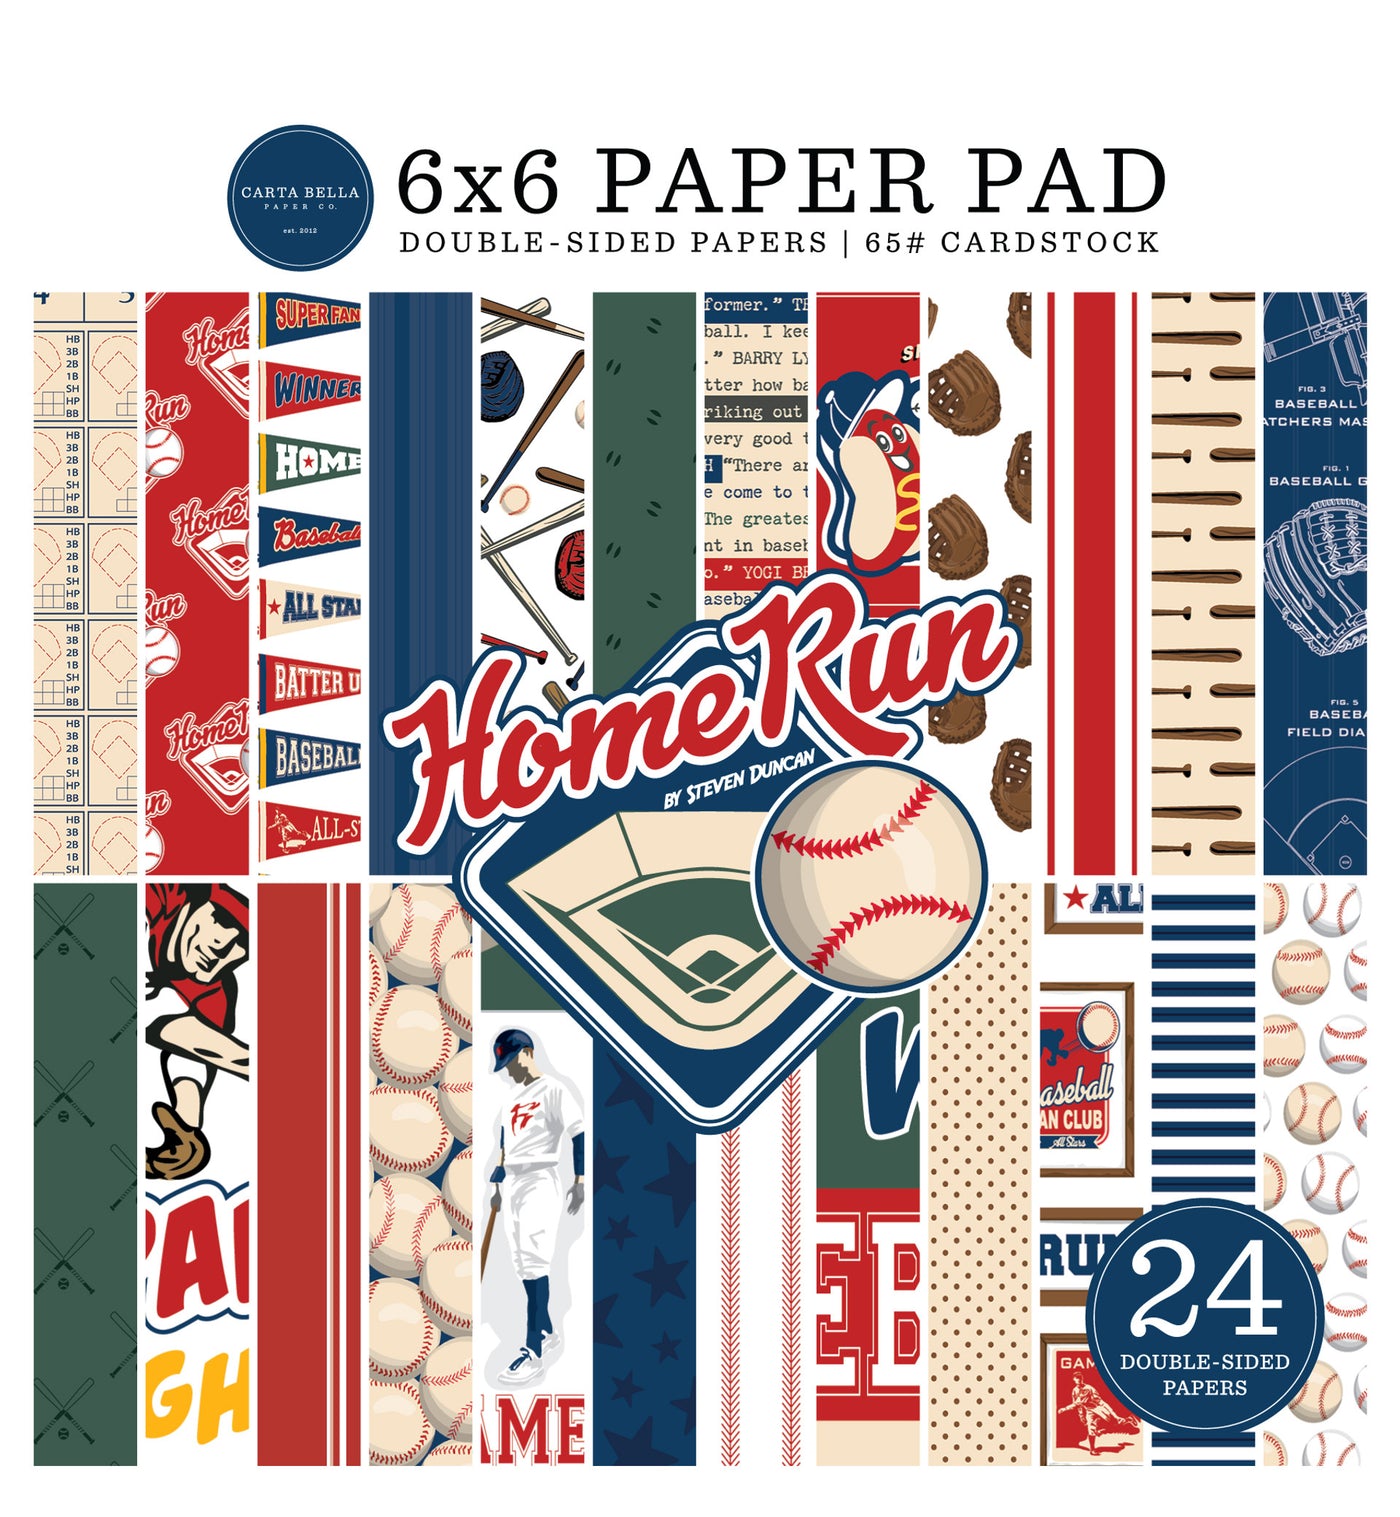 Versatile 6x6 pad with 24 double-sided sheets. Great for card making and pages that have anything to do with baseball. From Carta Bella Paper Co.